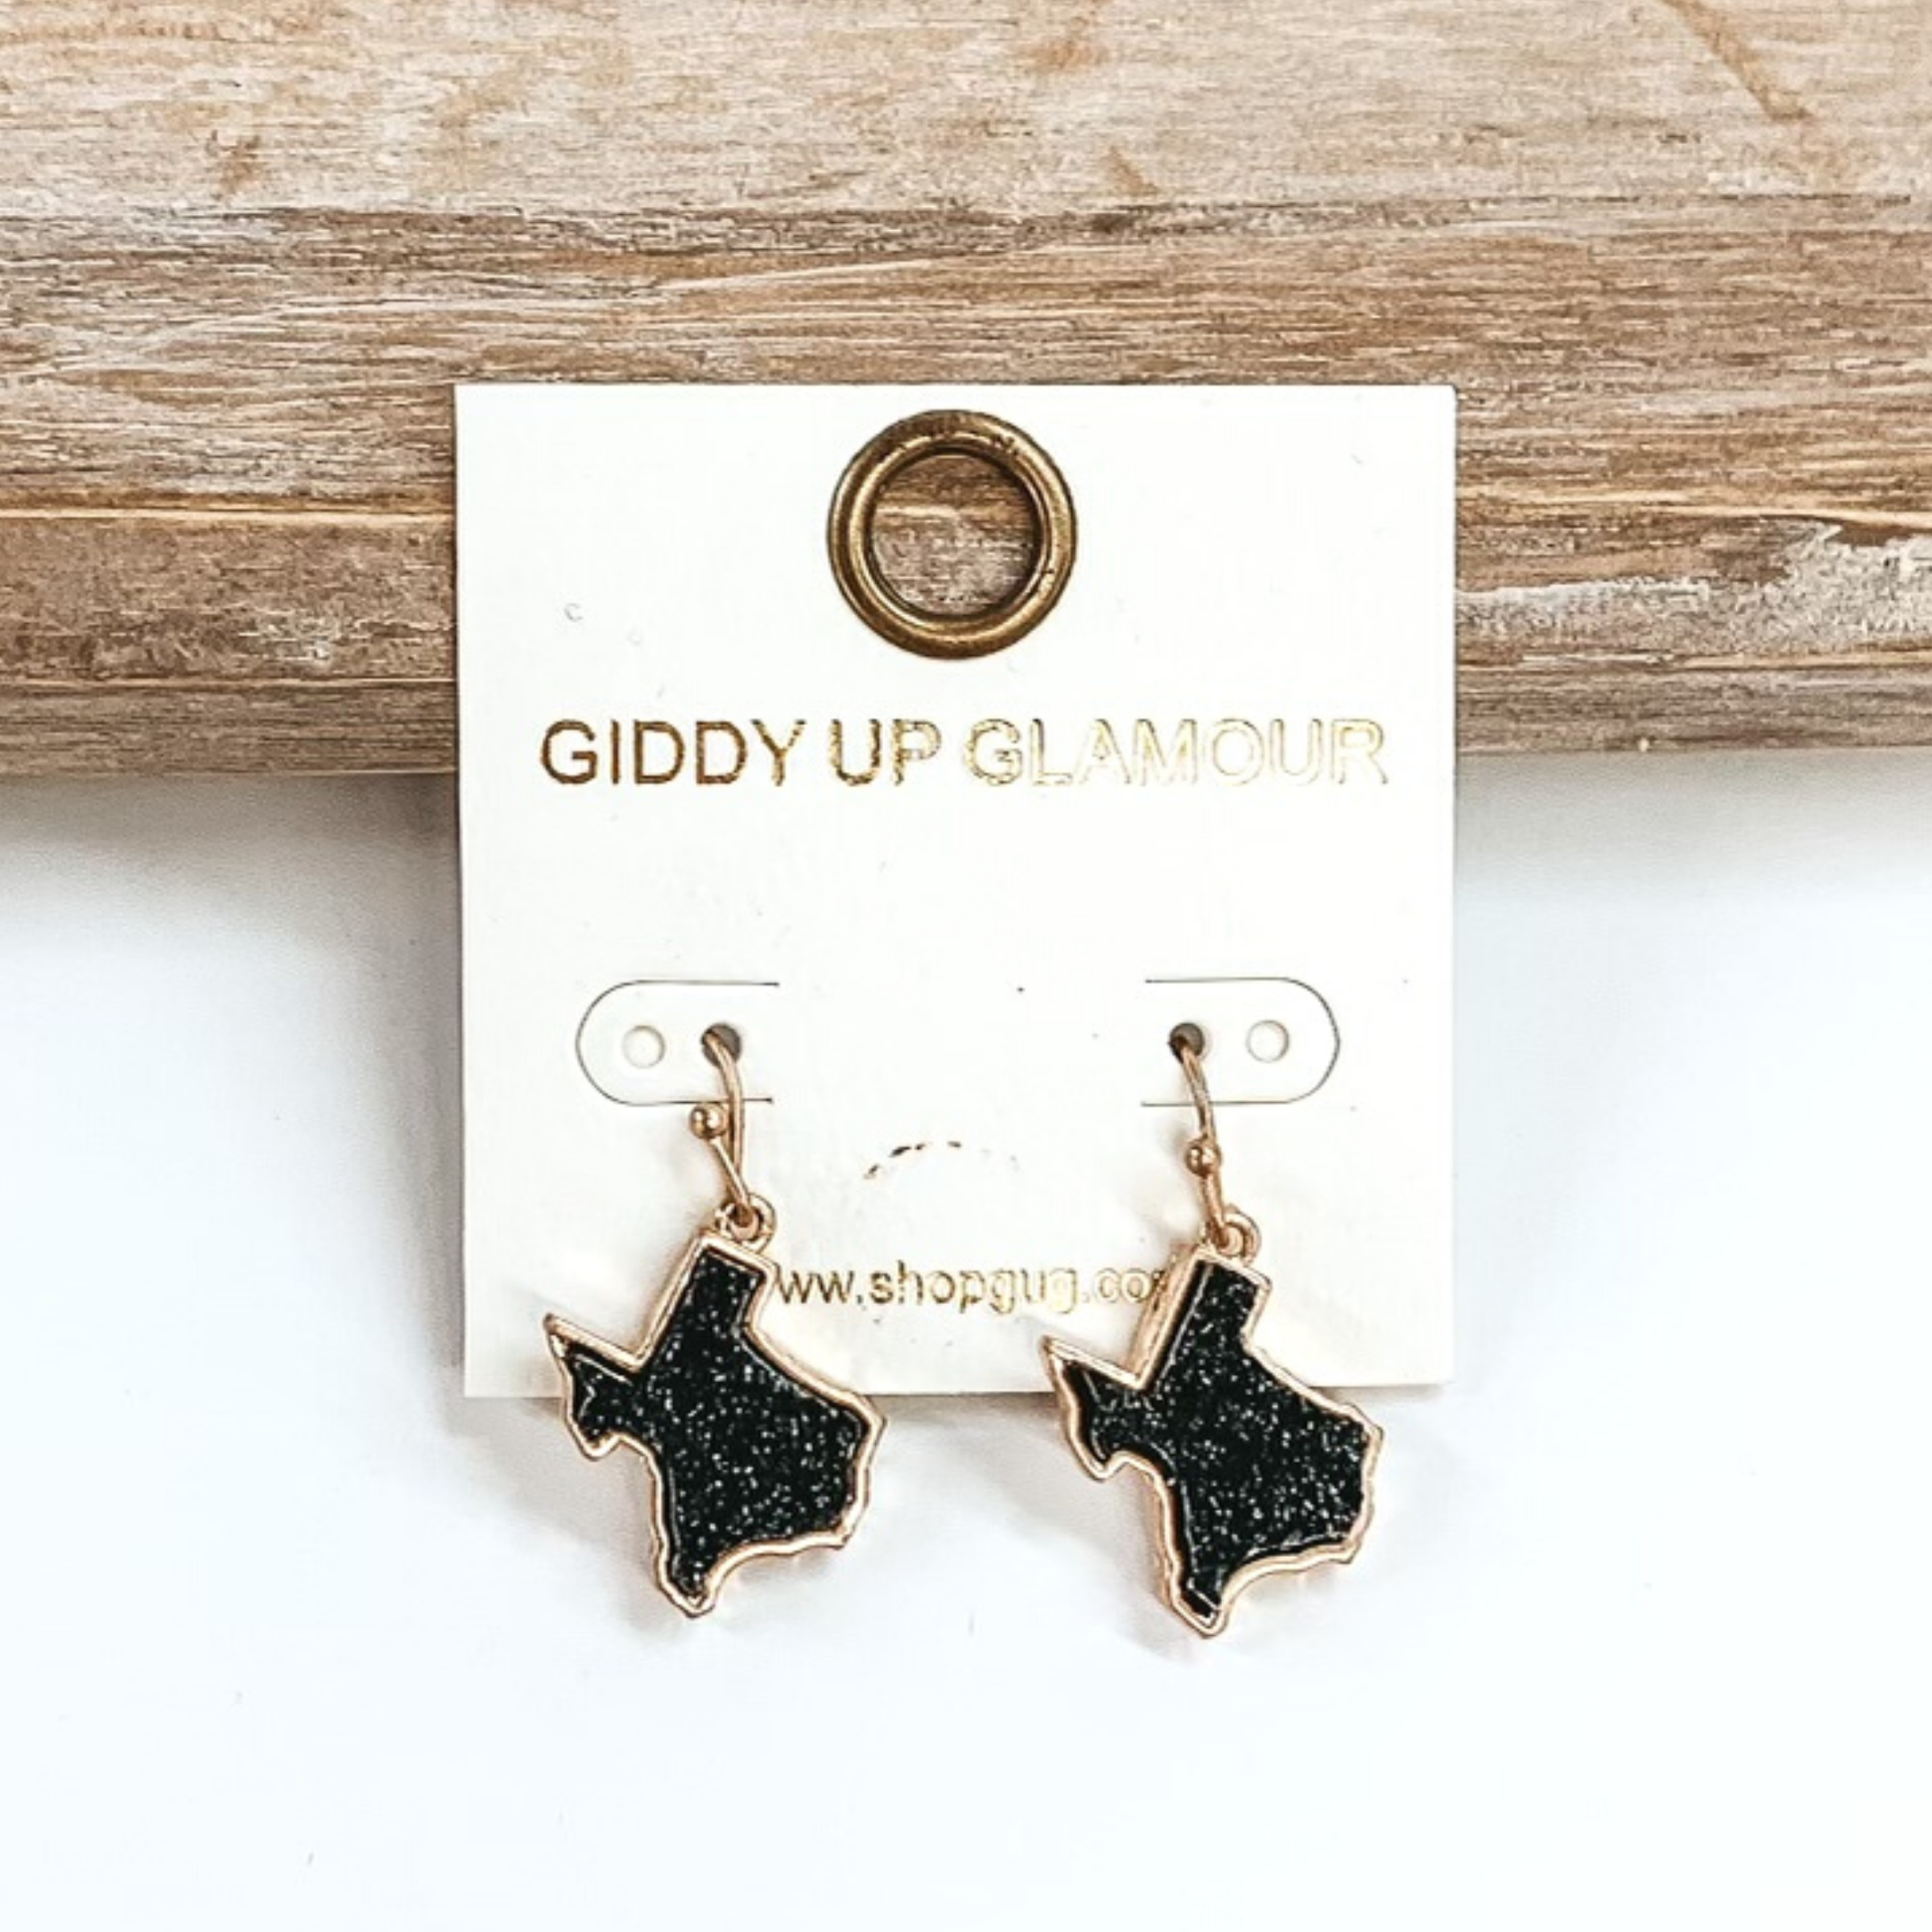 Gold dangle earrings with druzy, black, texas shaped stone. These earrings are pictured on a white earrings holder on a white background, leaning against a tan block.